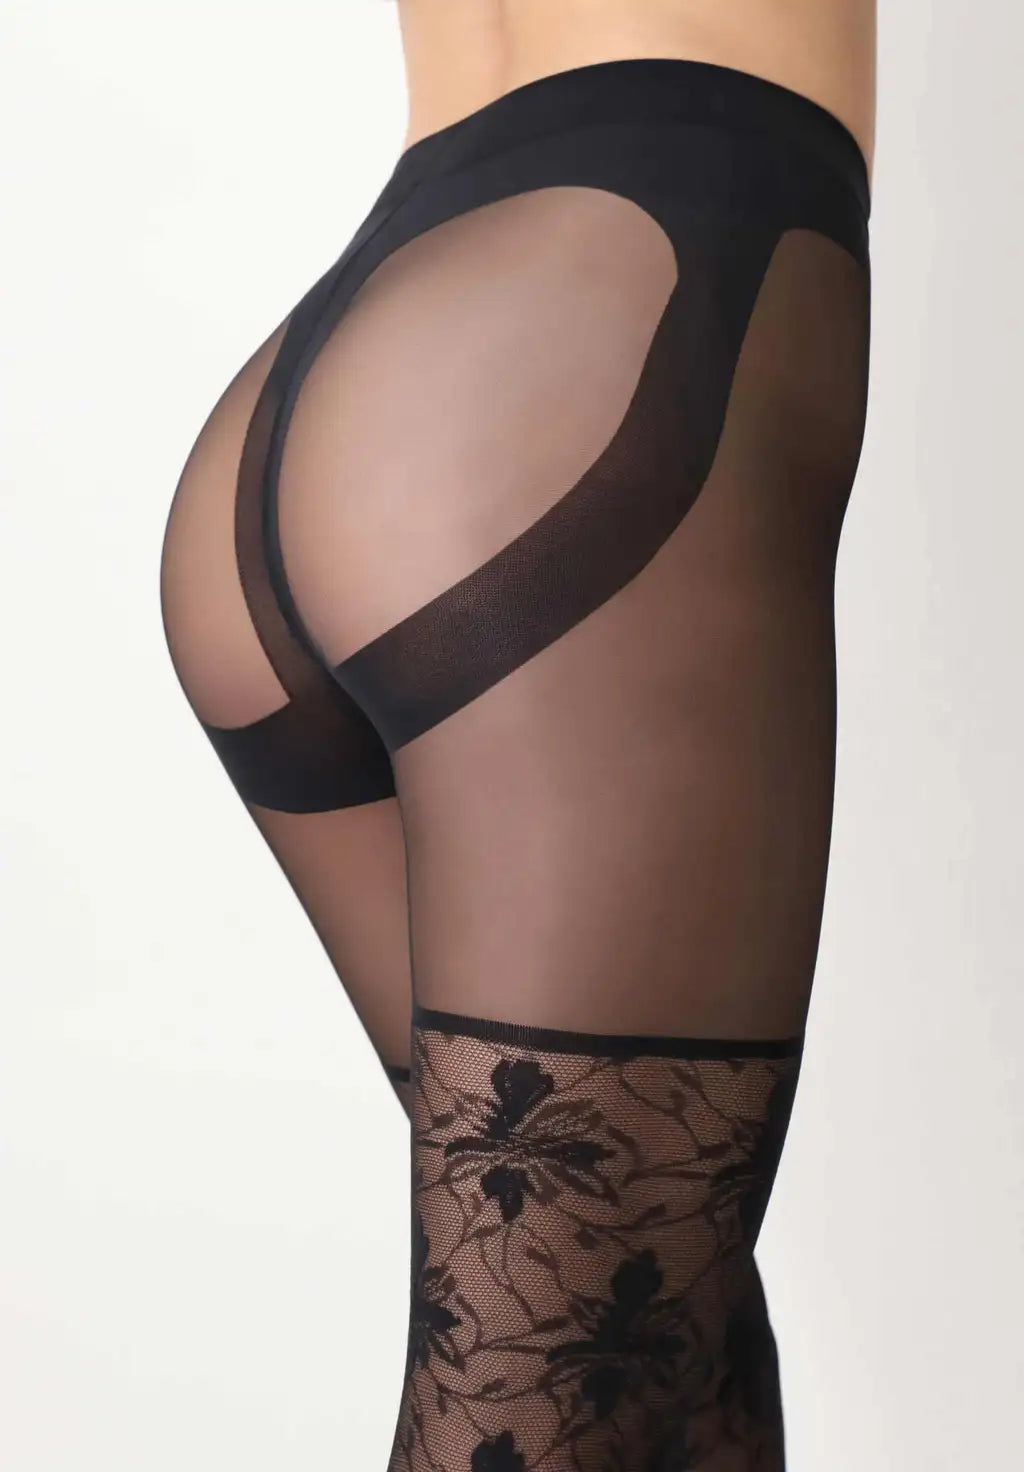 Oroblù Shock Up Lace Tights - Black semi-sheer fashion tights with a floral lace pattern up to the thigh, shaping push-up panty control-top